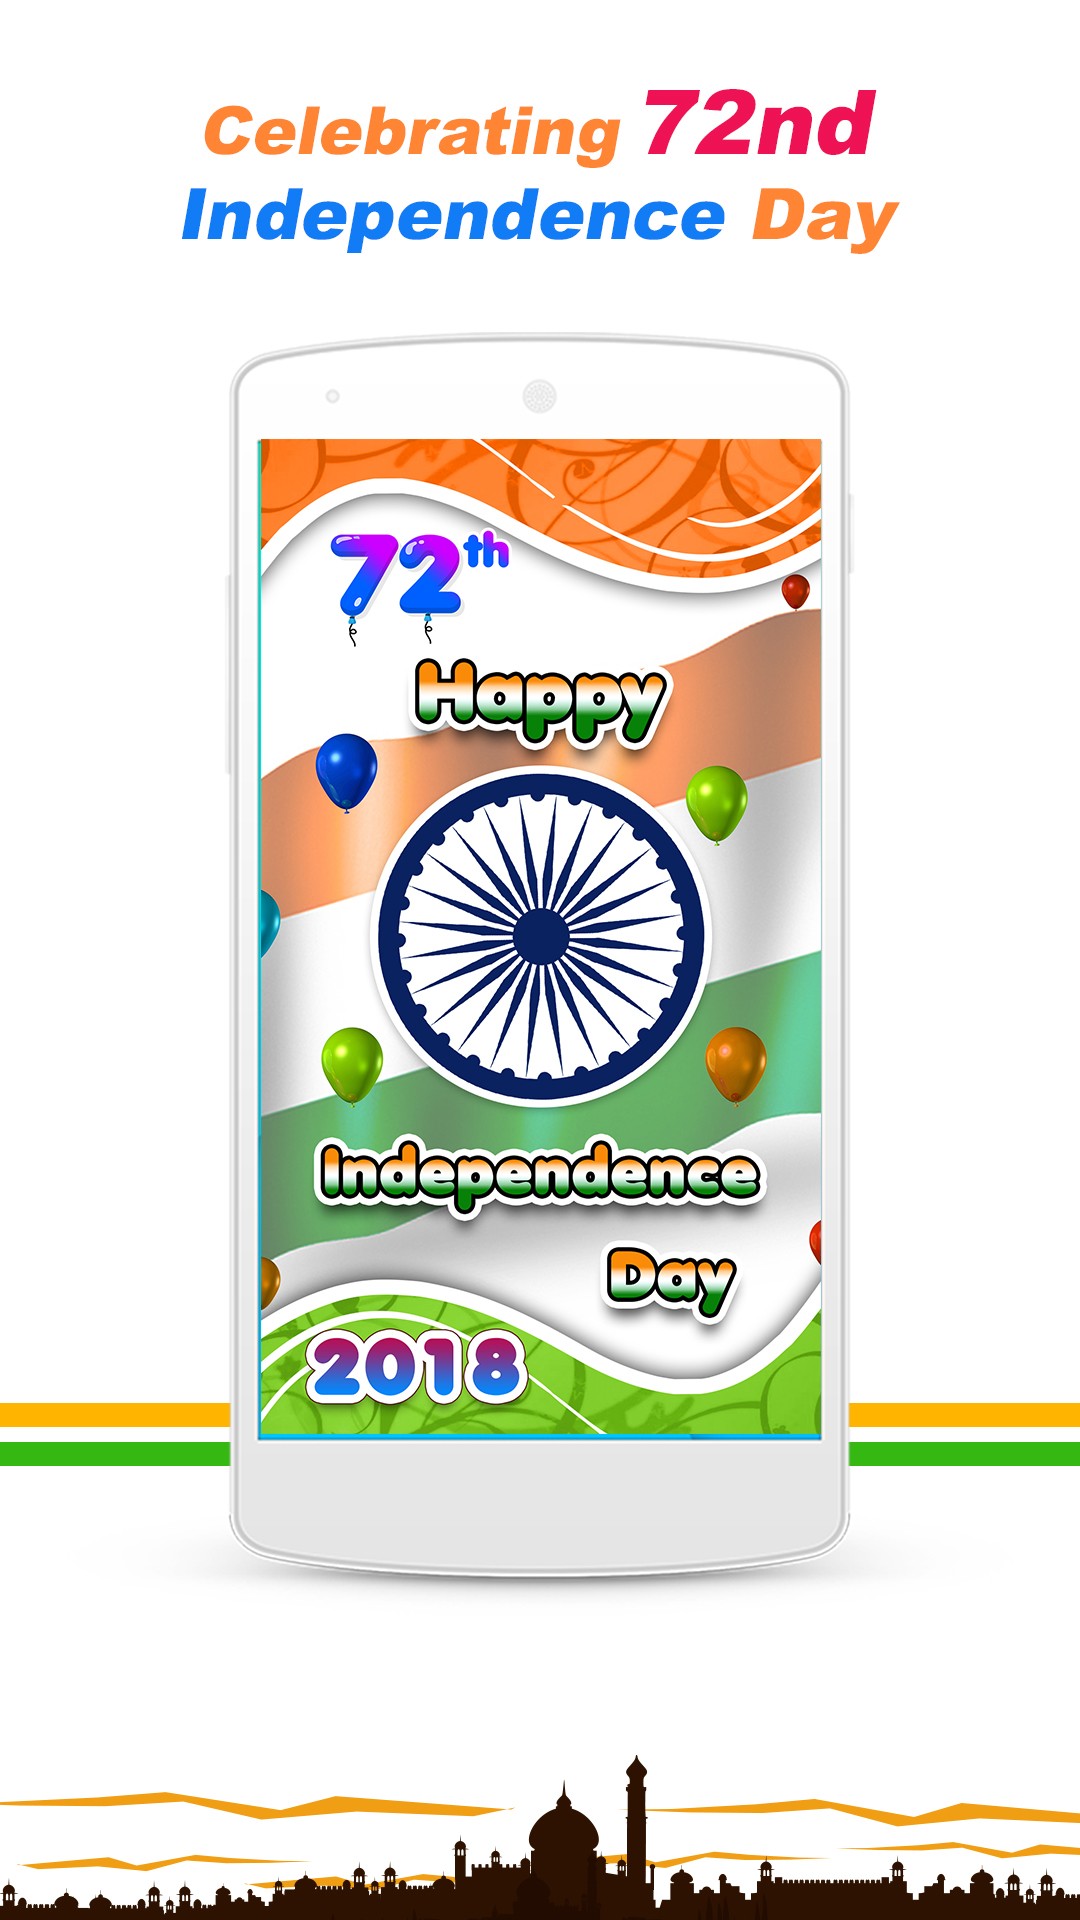 Indian Flag Live Wallpaper - 72nd Independence Day India - HD Wallpaper 